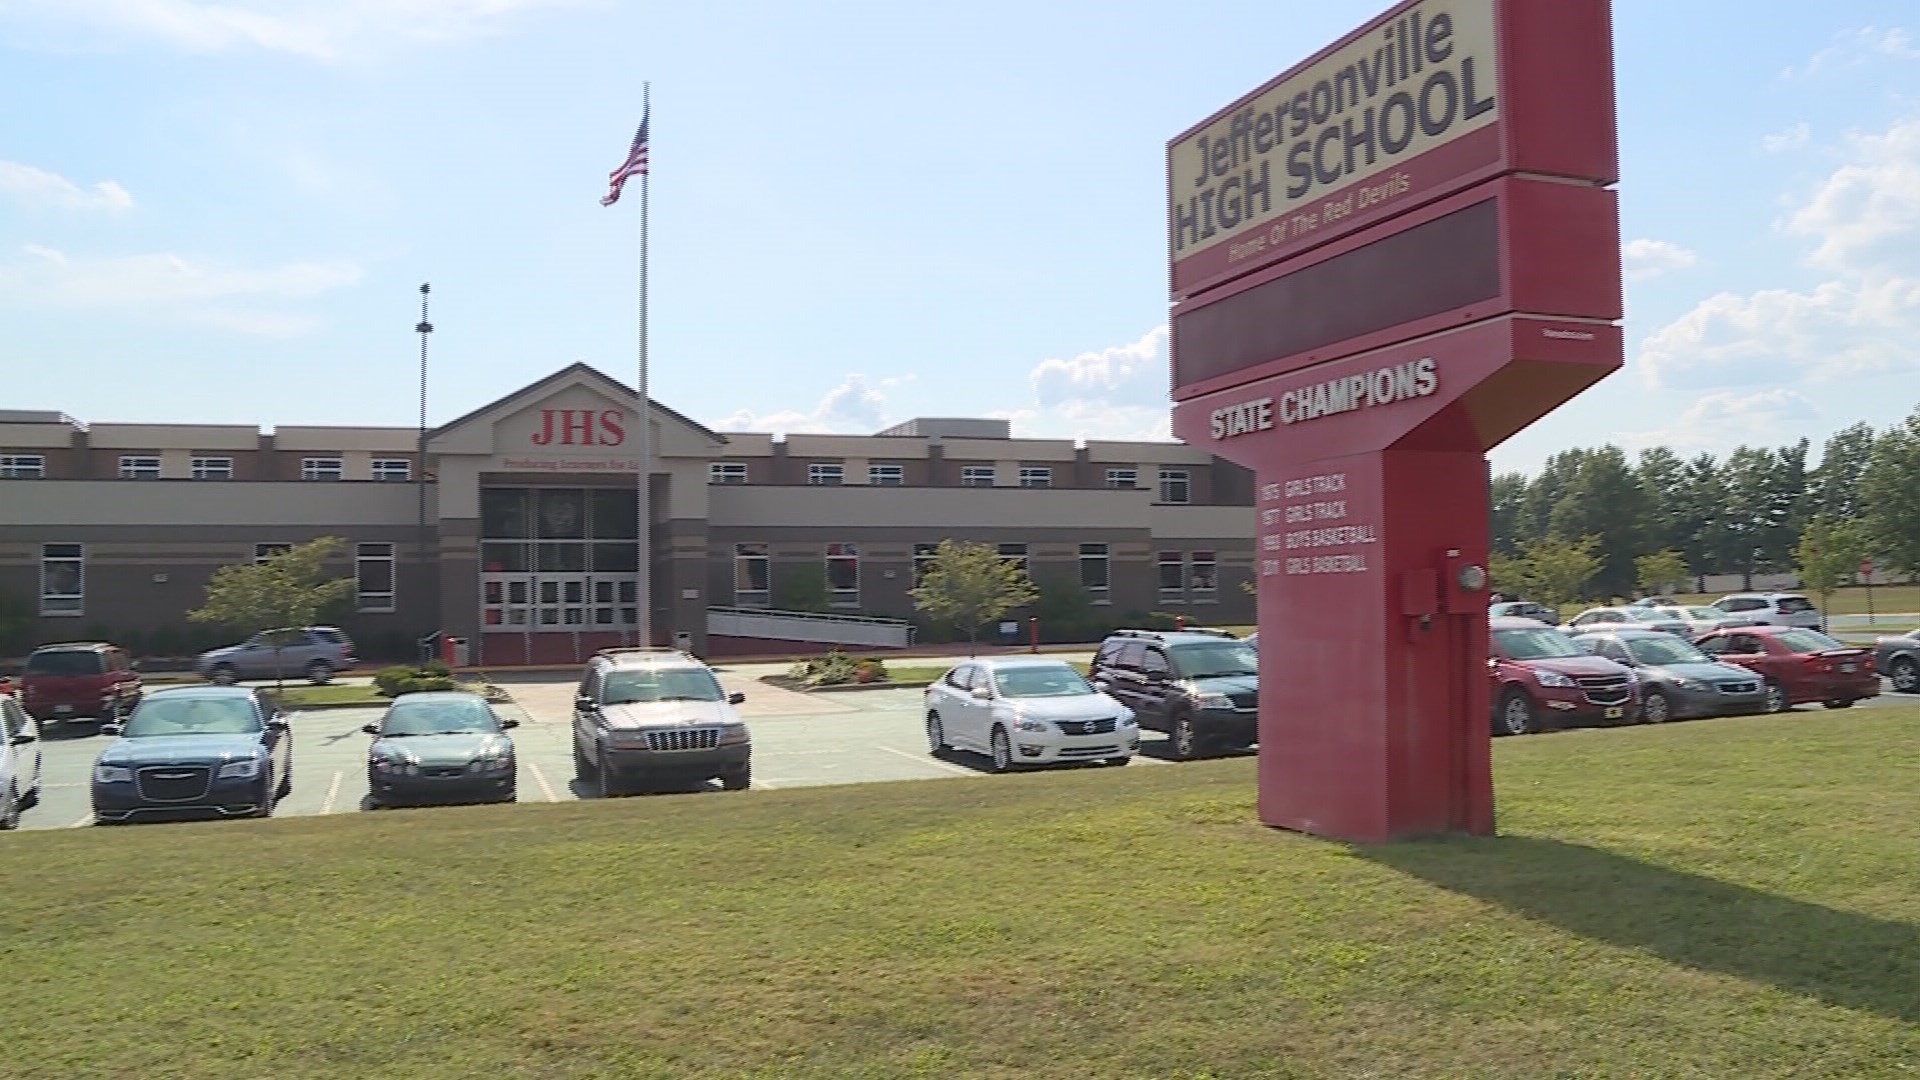 Beginning in Spring 2019, Jeffersonville High grads can go to Ivy Tech